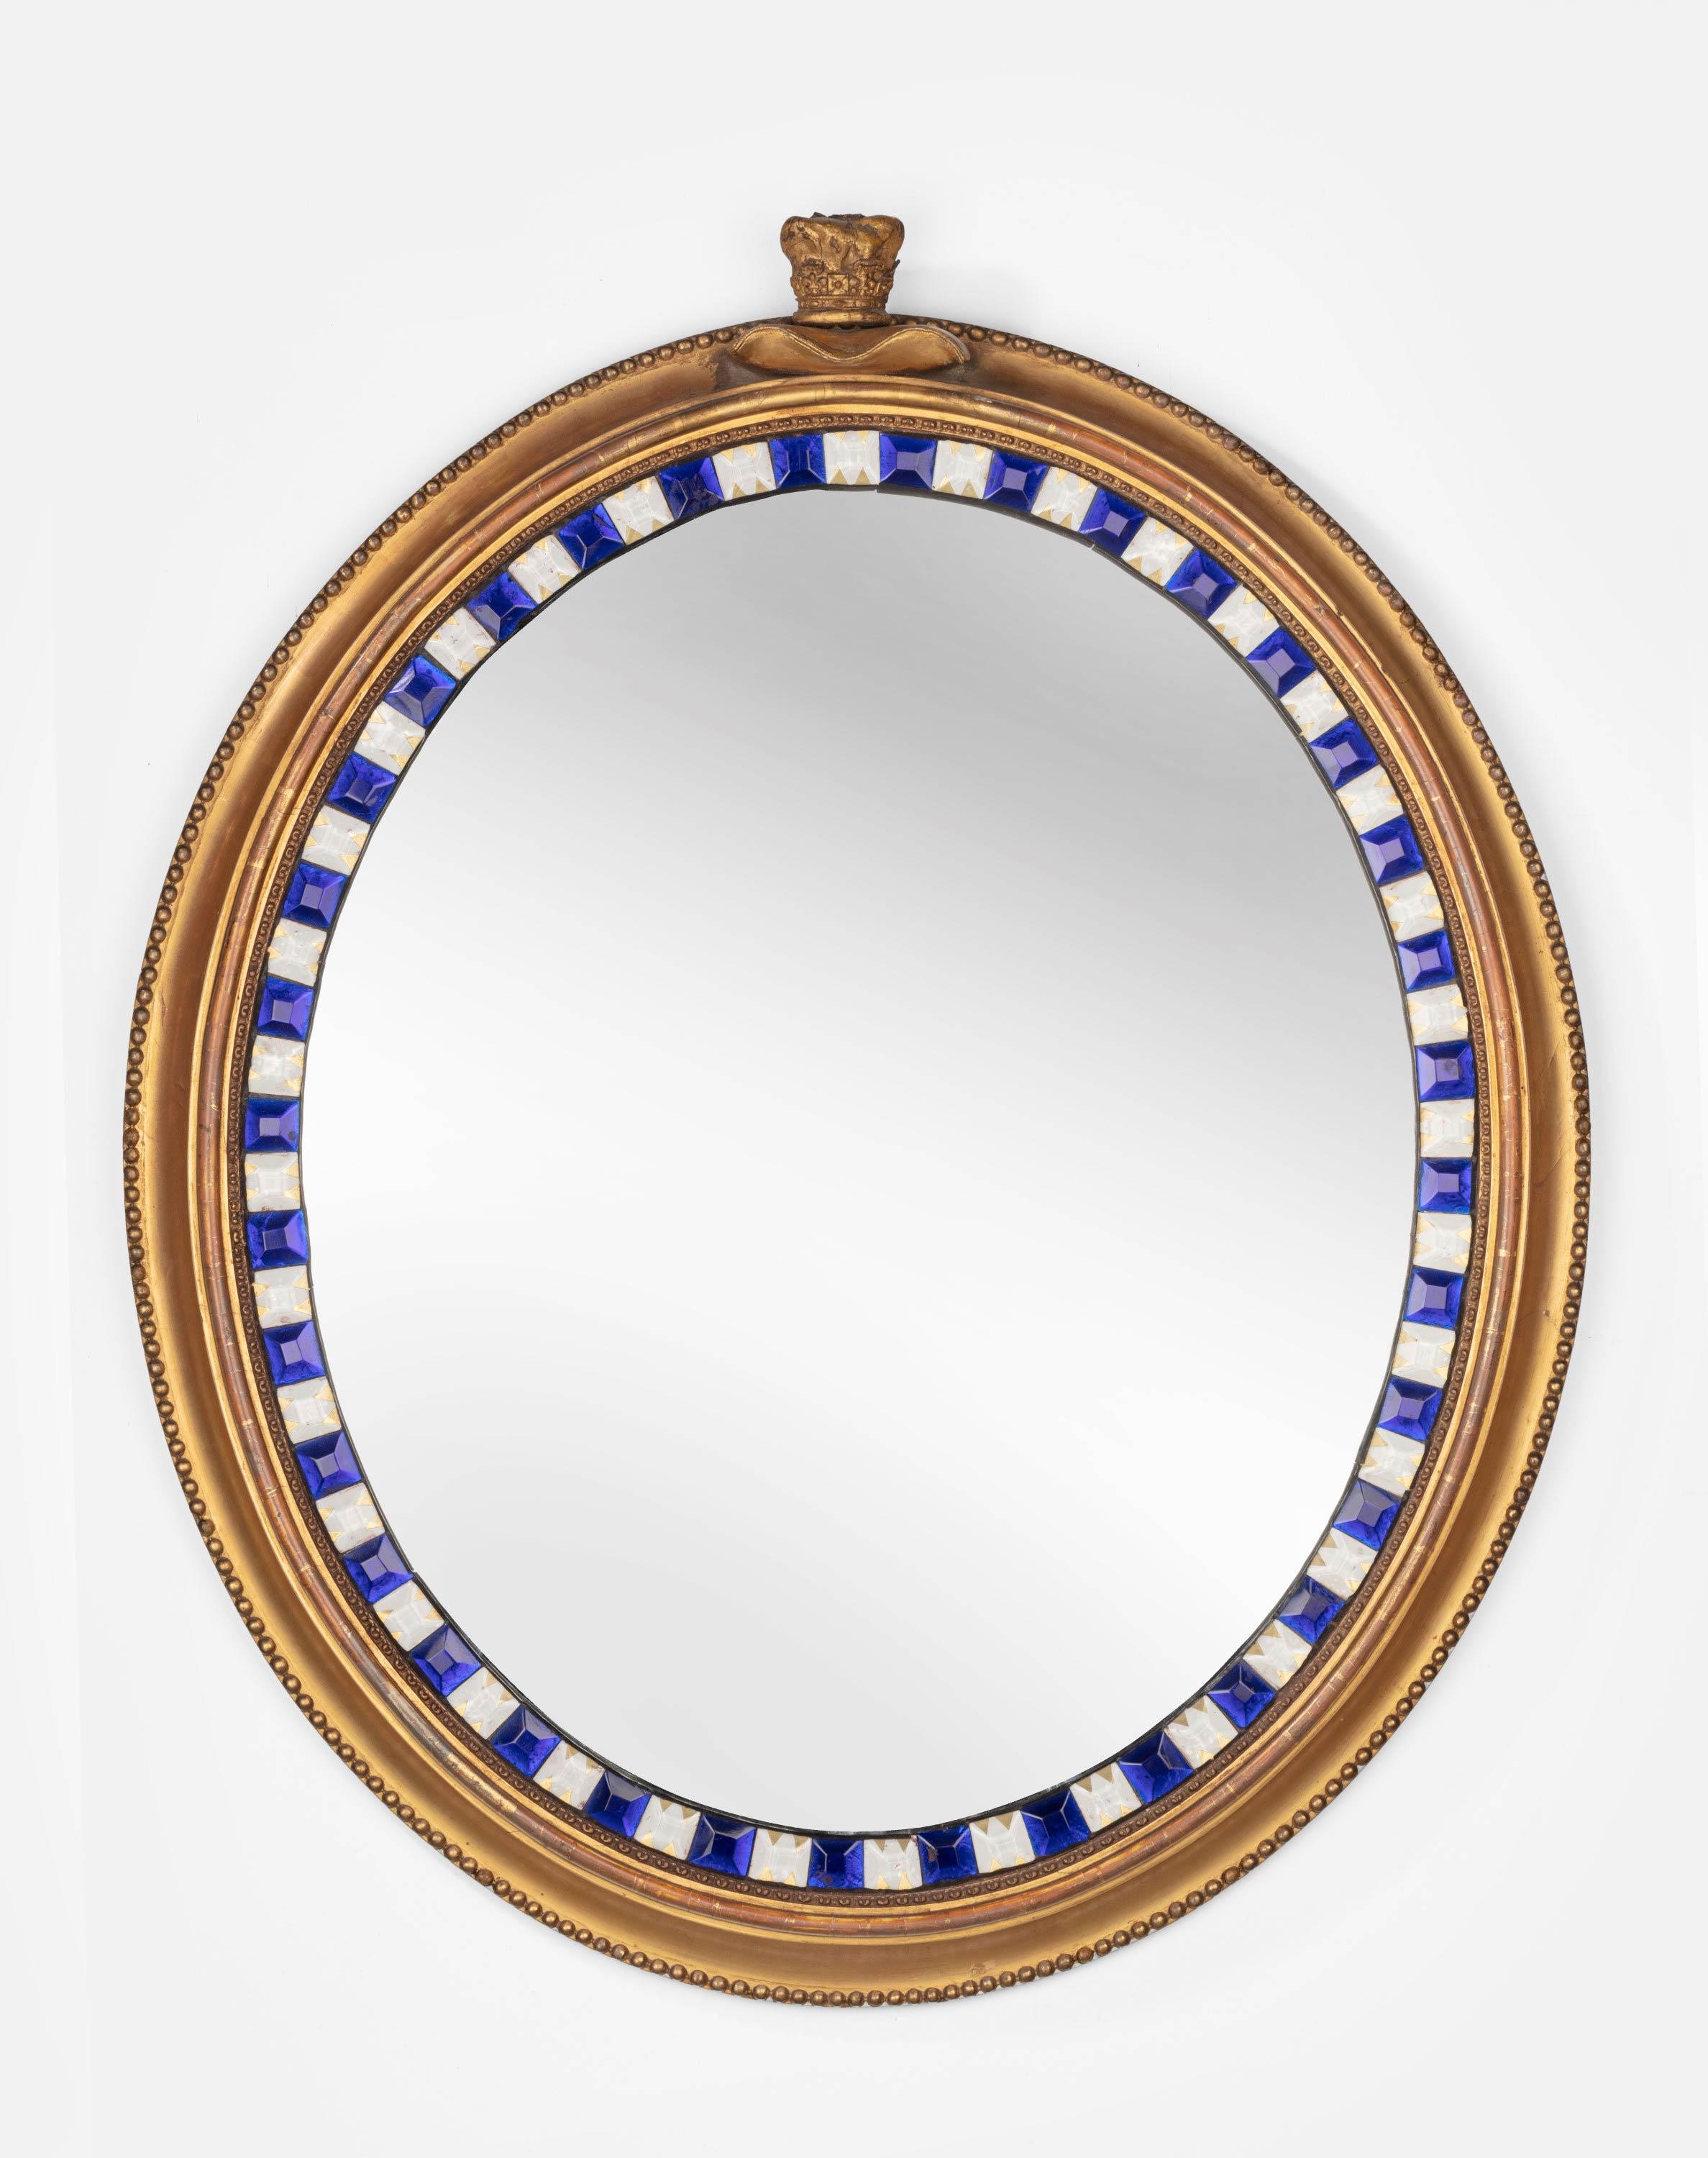 A rare pair of 19th century giltwood and glass, Irish, oval shaped mirrors. The borders of midnight blue buttons with old glass and gilded alternatives. Original gilding now somewhat tired. With a makers label dating from the 1830s.
  